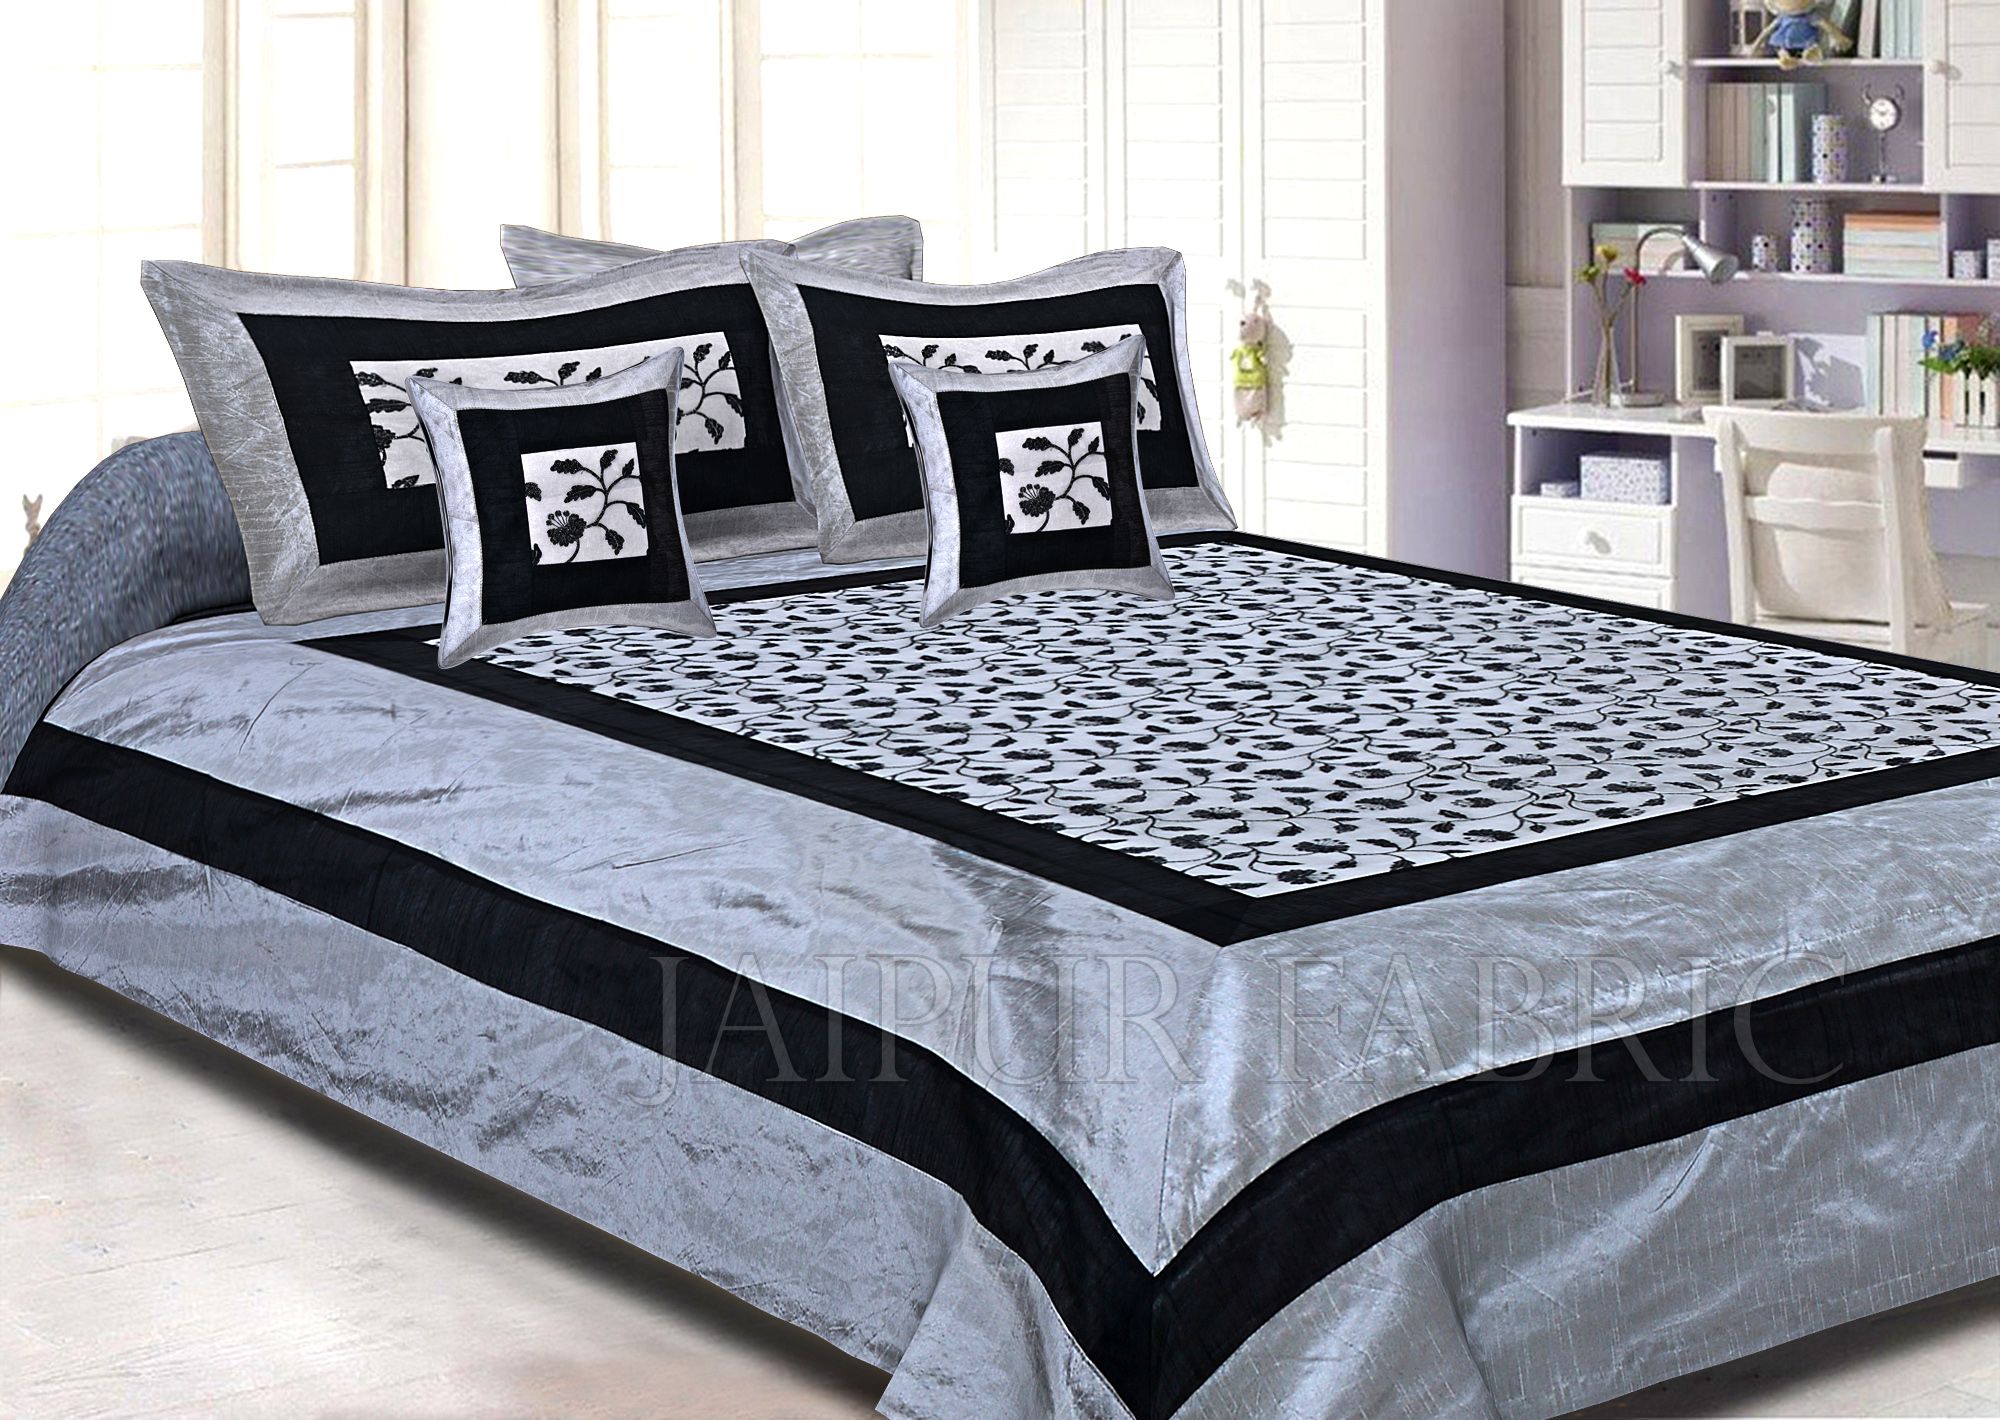 Light Grey Base And Black Border  Double Layerd Silk And Tissue Shinig Fabric With Computer Embroidery With Black Silk Thread Double Bedsheet